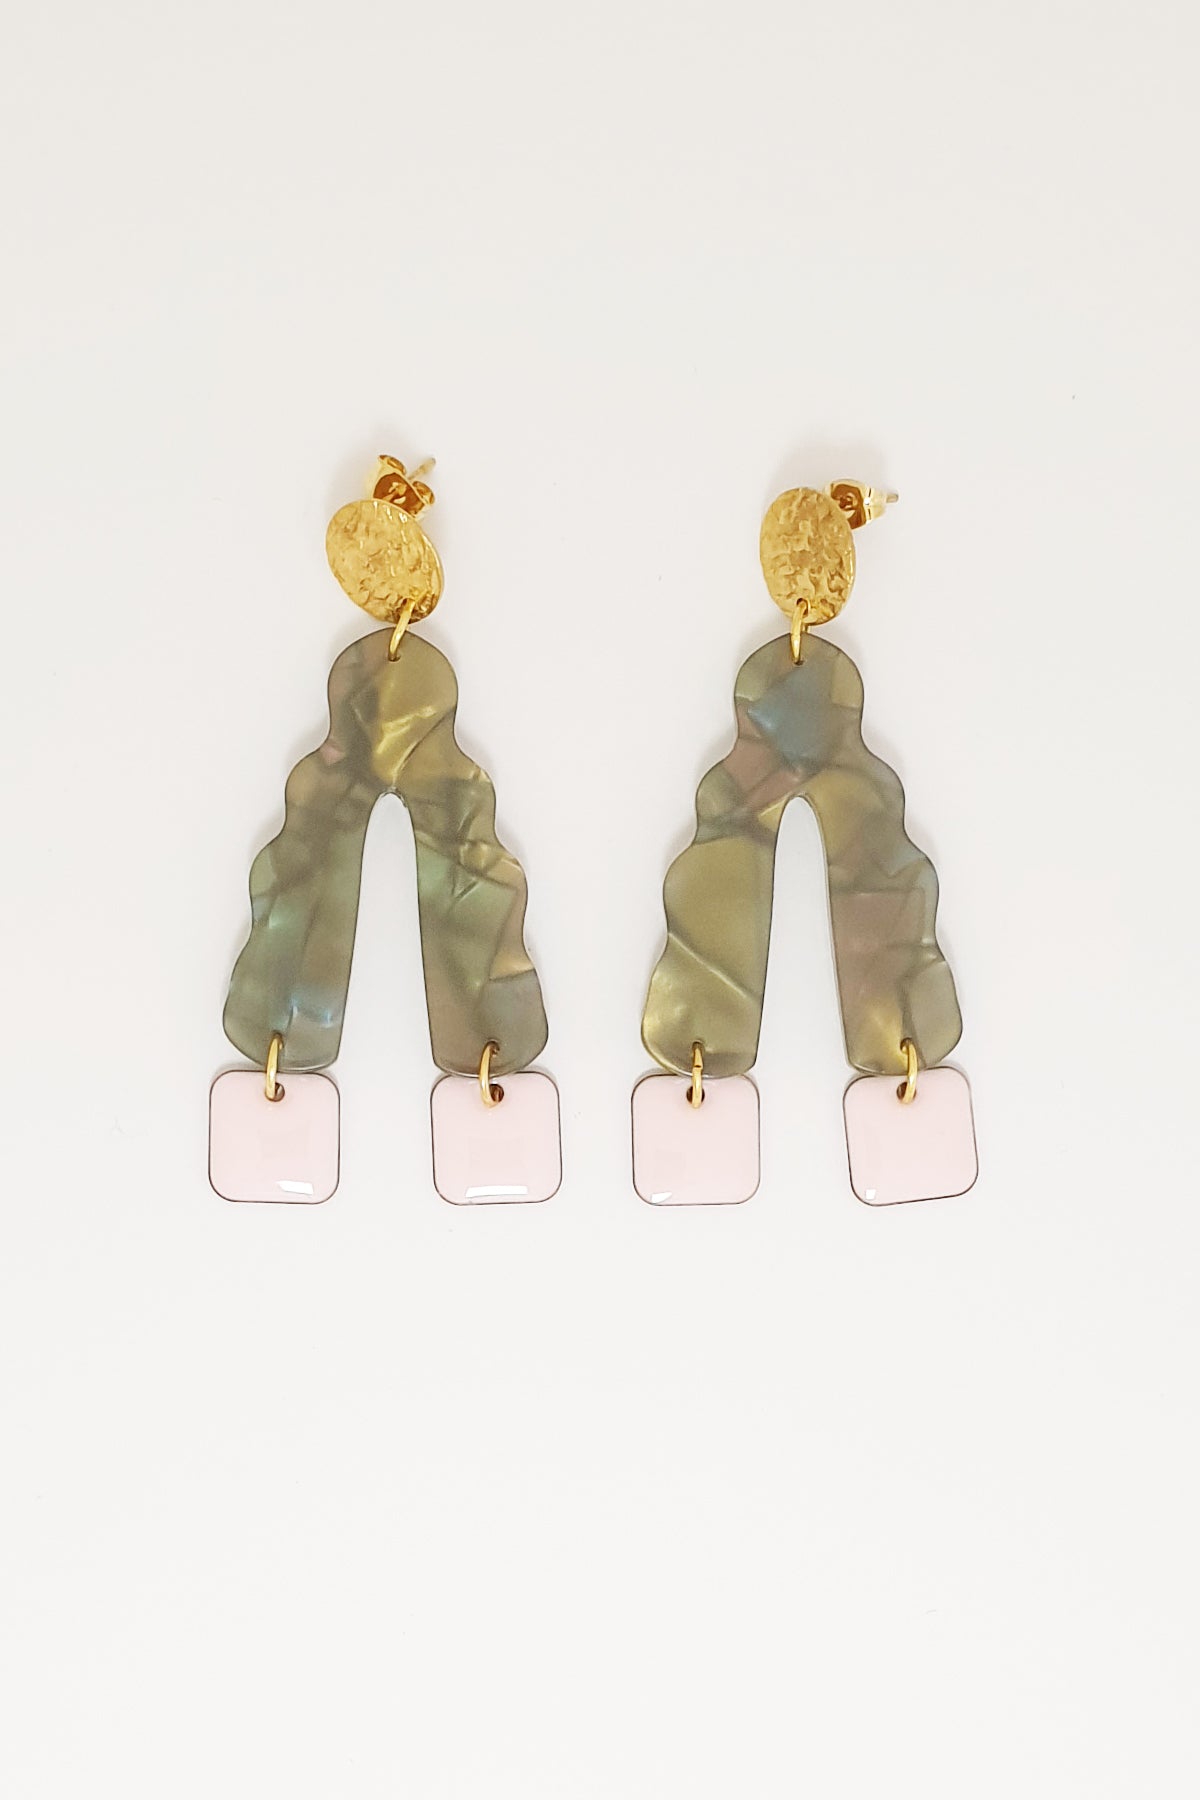 A pair of stud dangle earrings sit against a white background. They feature a textured circular gold stud top, a green wavy upside down V-shaped acrylic, and blossom pink square shaped enamel drops hanging from each end of the acrylic.